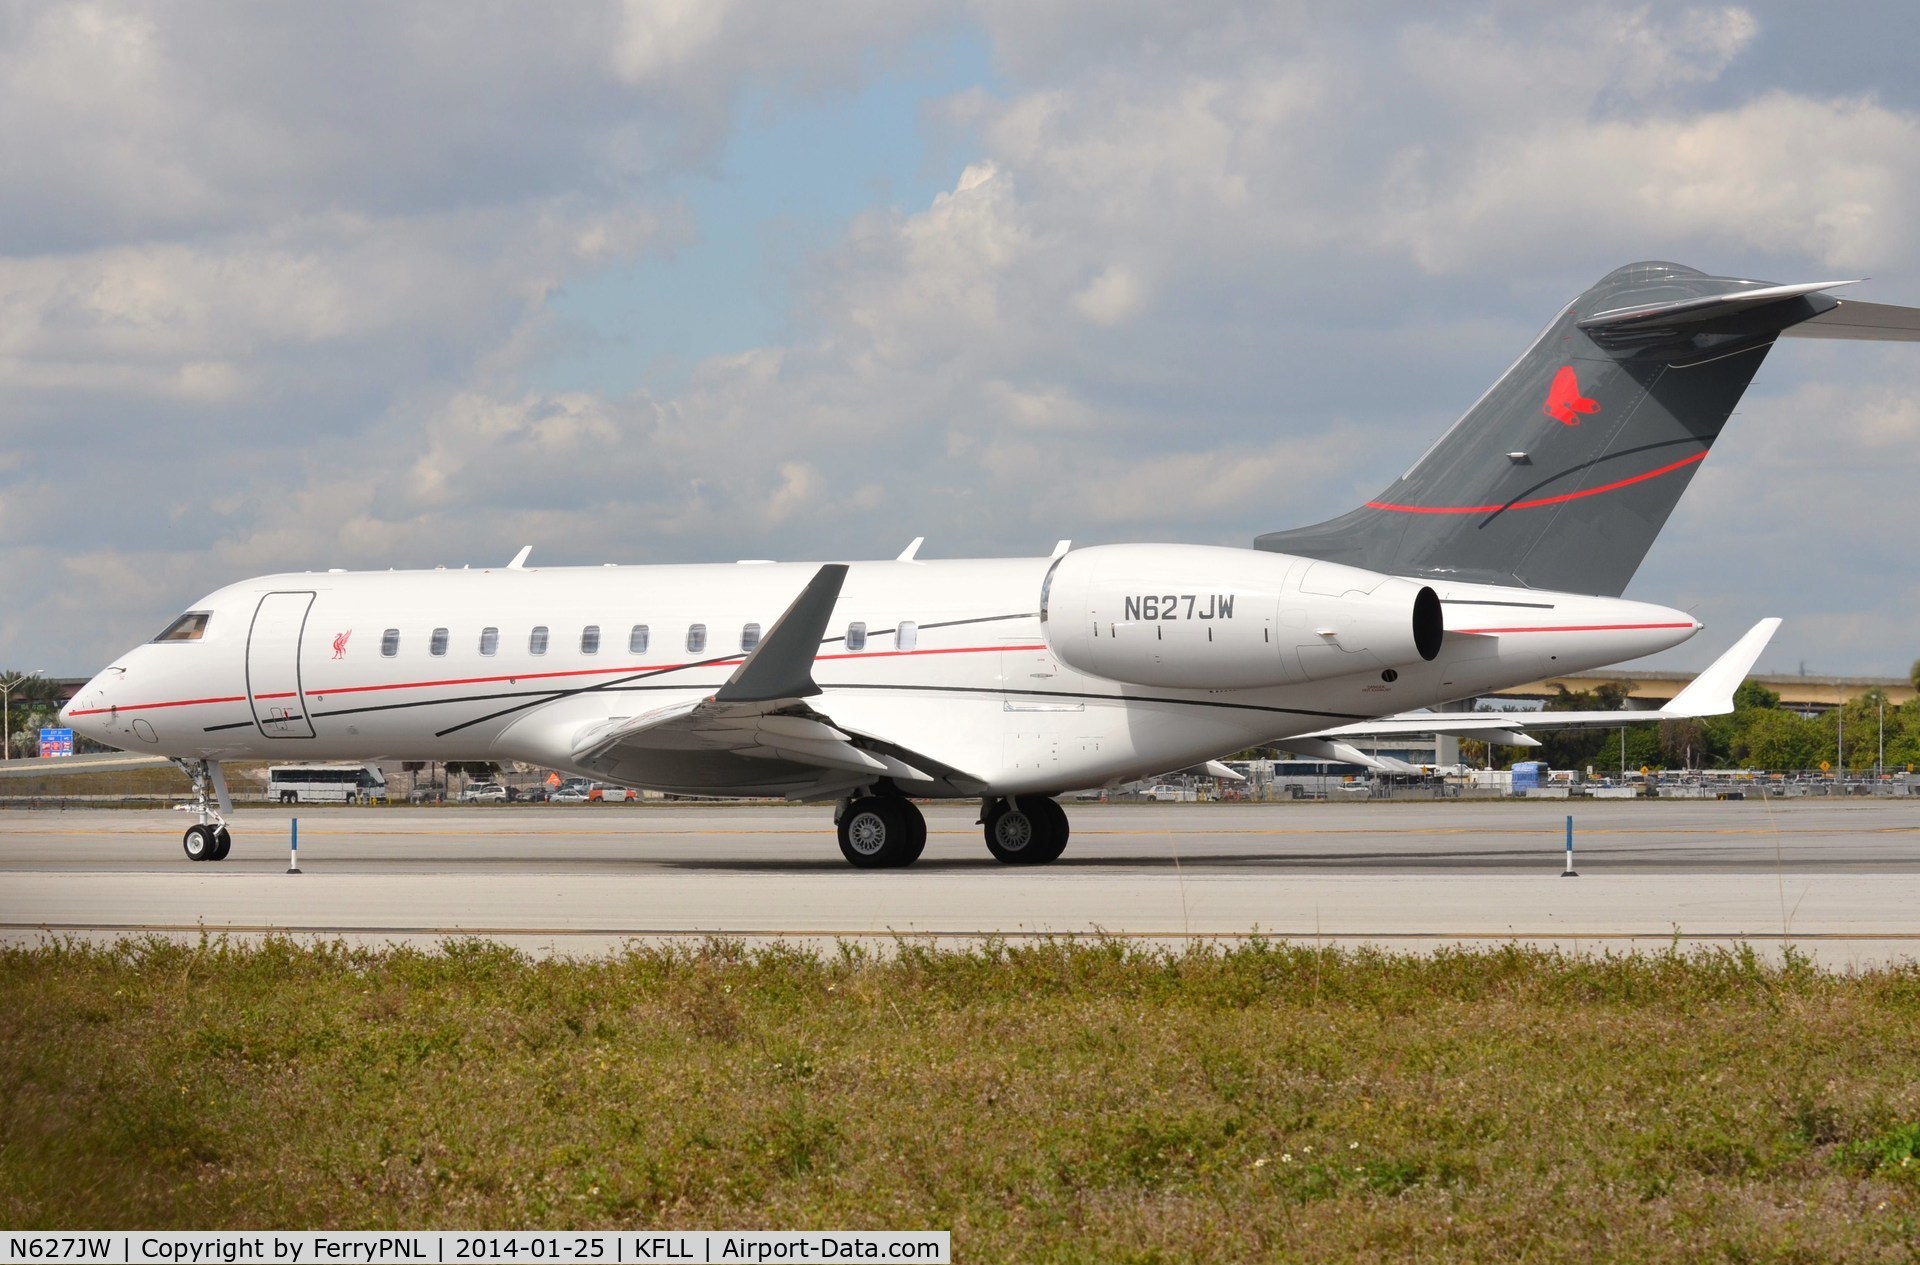 N627JW, 2013 Bombardier BD-700-1A11 Global 5000 C/N 9550, John W Henry is the owner of the Boston Red Socks. Aircraft based in Boca Raton, FL.